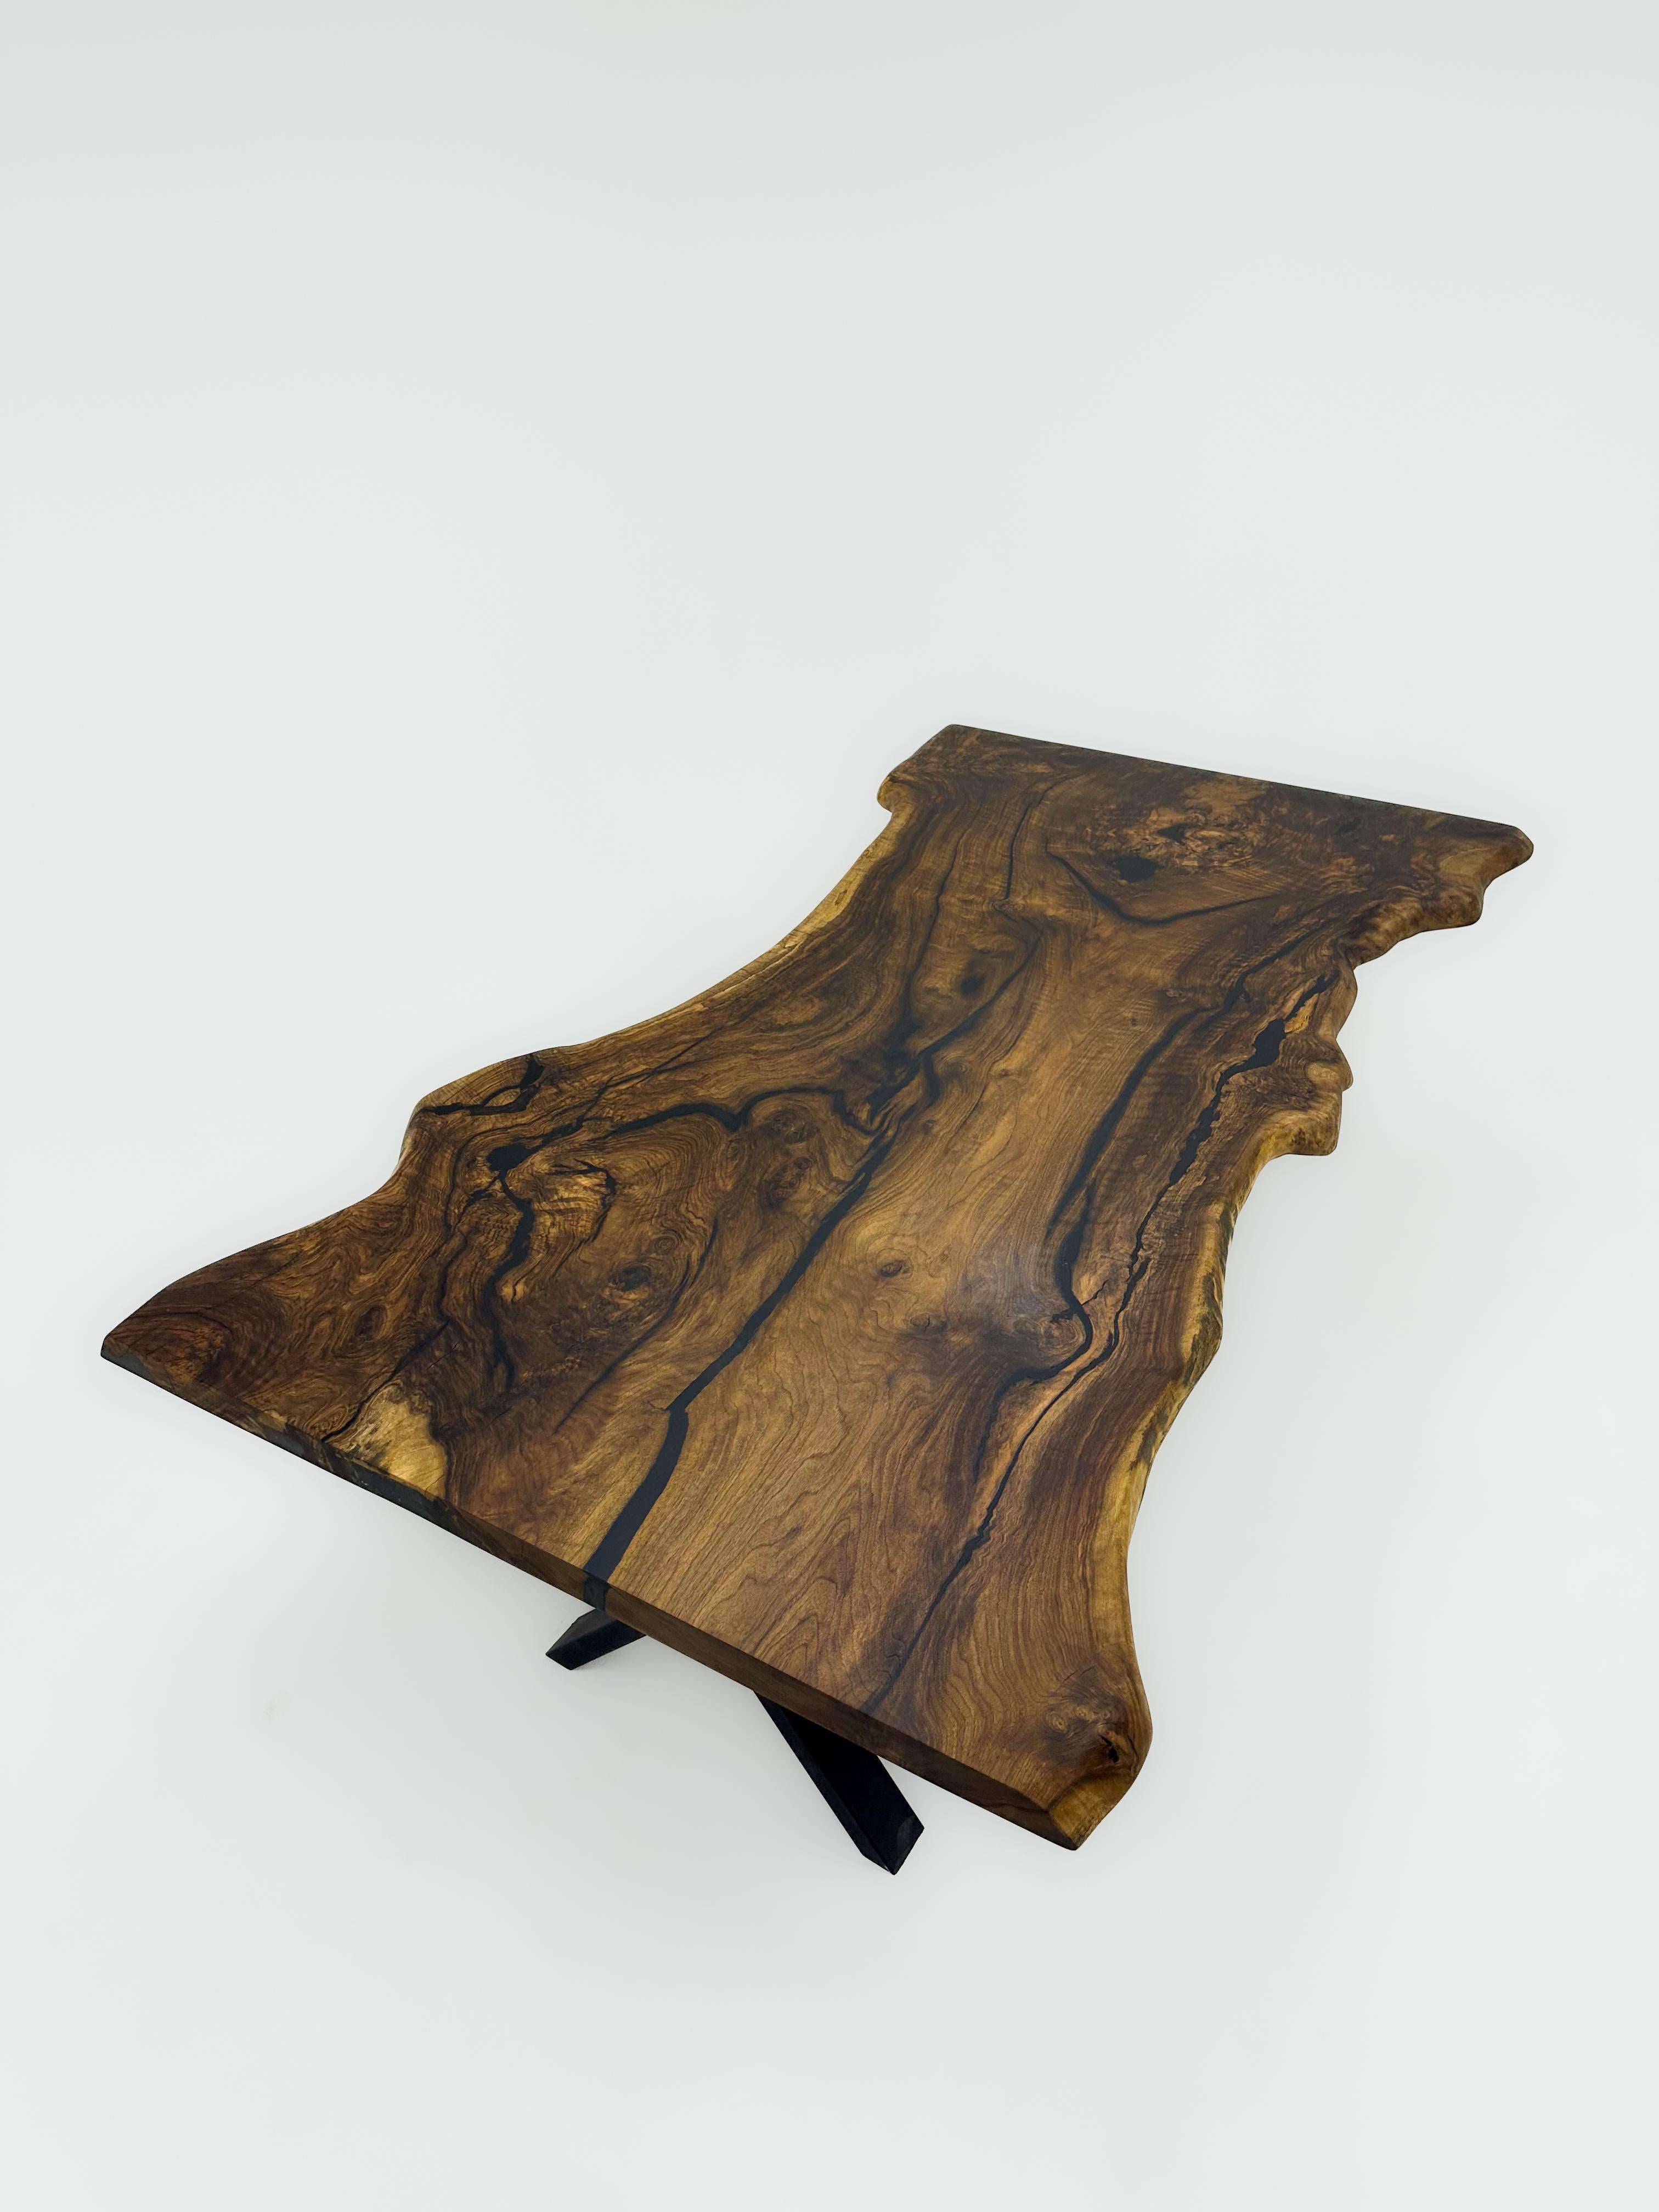 LIVE EDGE WALNUT CONFERENCE TABLE

This table is made of natural walnut slabs. 

Some Walnut slabs have a lot of natural beauty as it’s one side has a large curve. This is one of them! 

We've filled the cracks with black epoxy, without disrupting